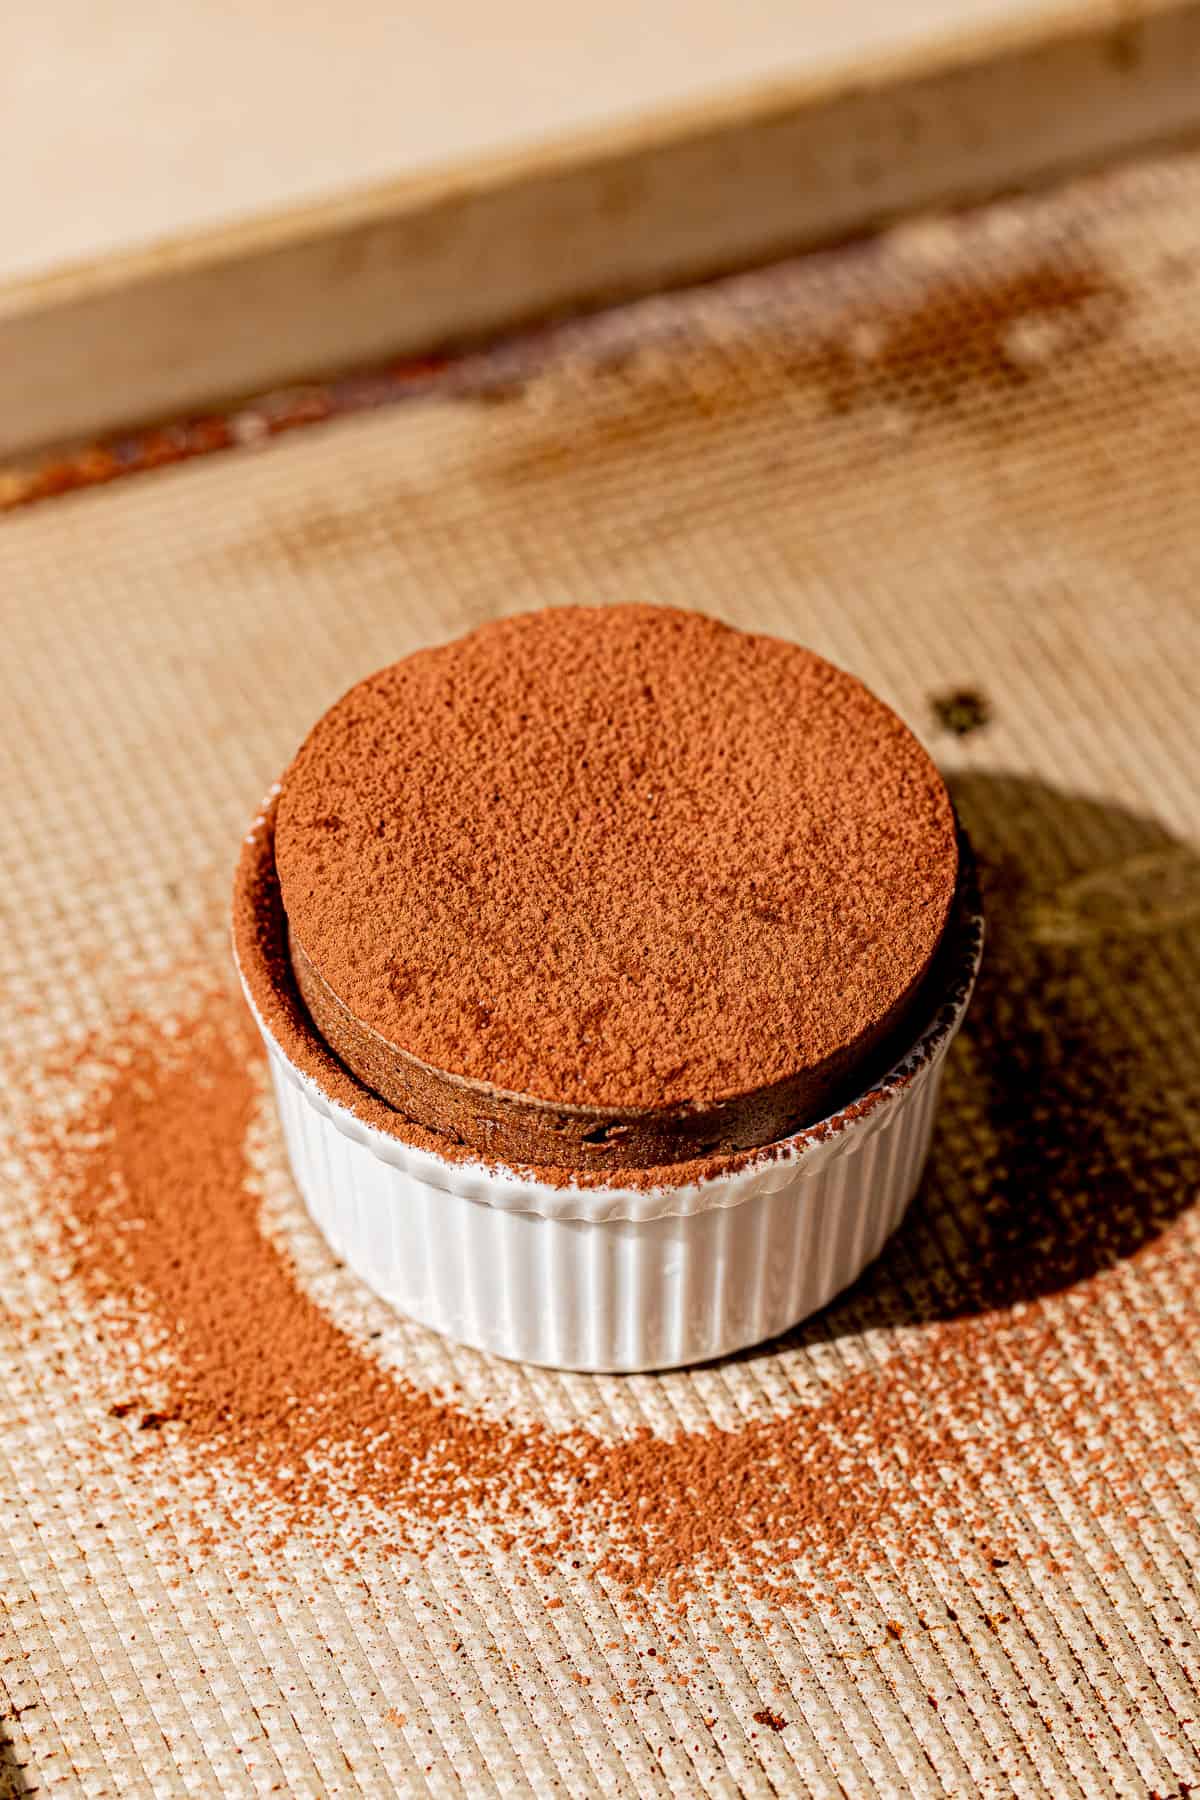 chocolate souffle in white ramekin with cocoa powder dusted on top.